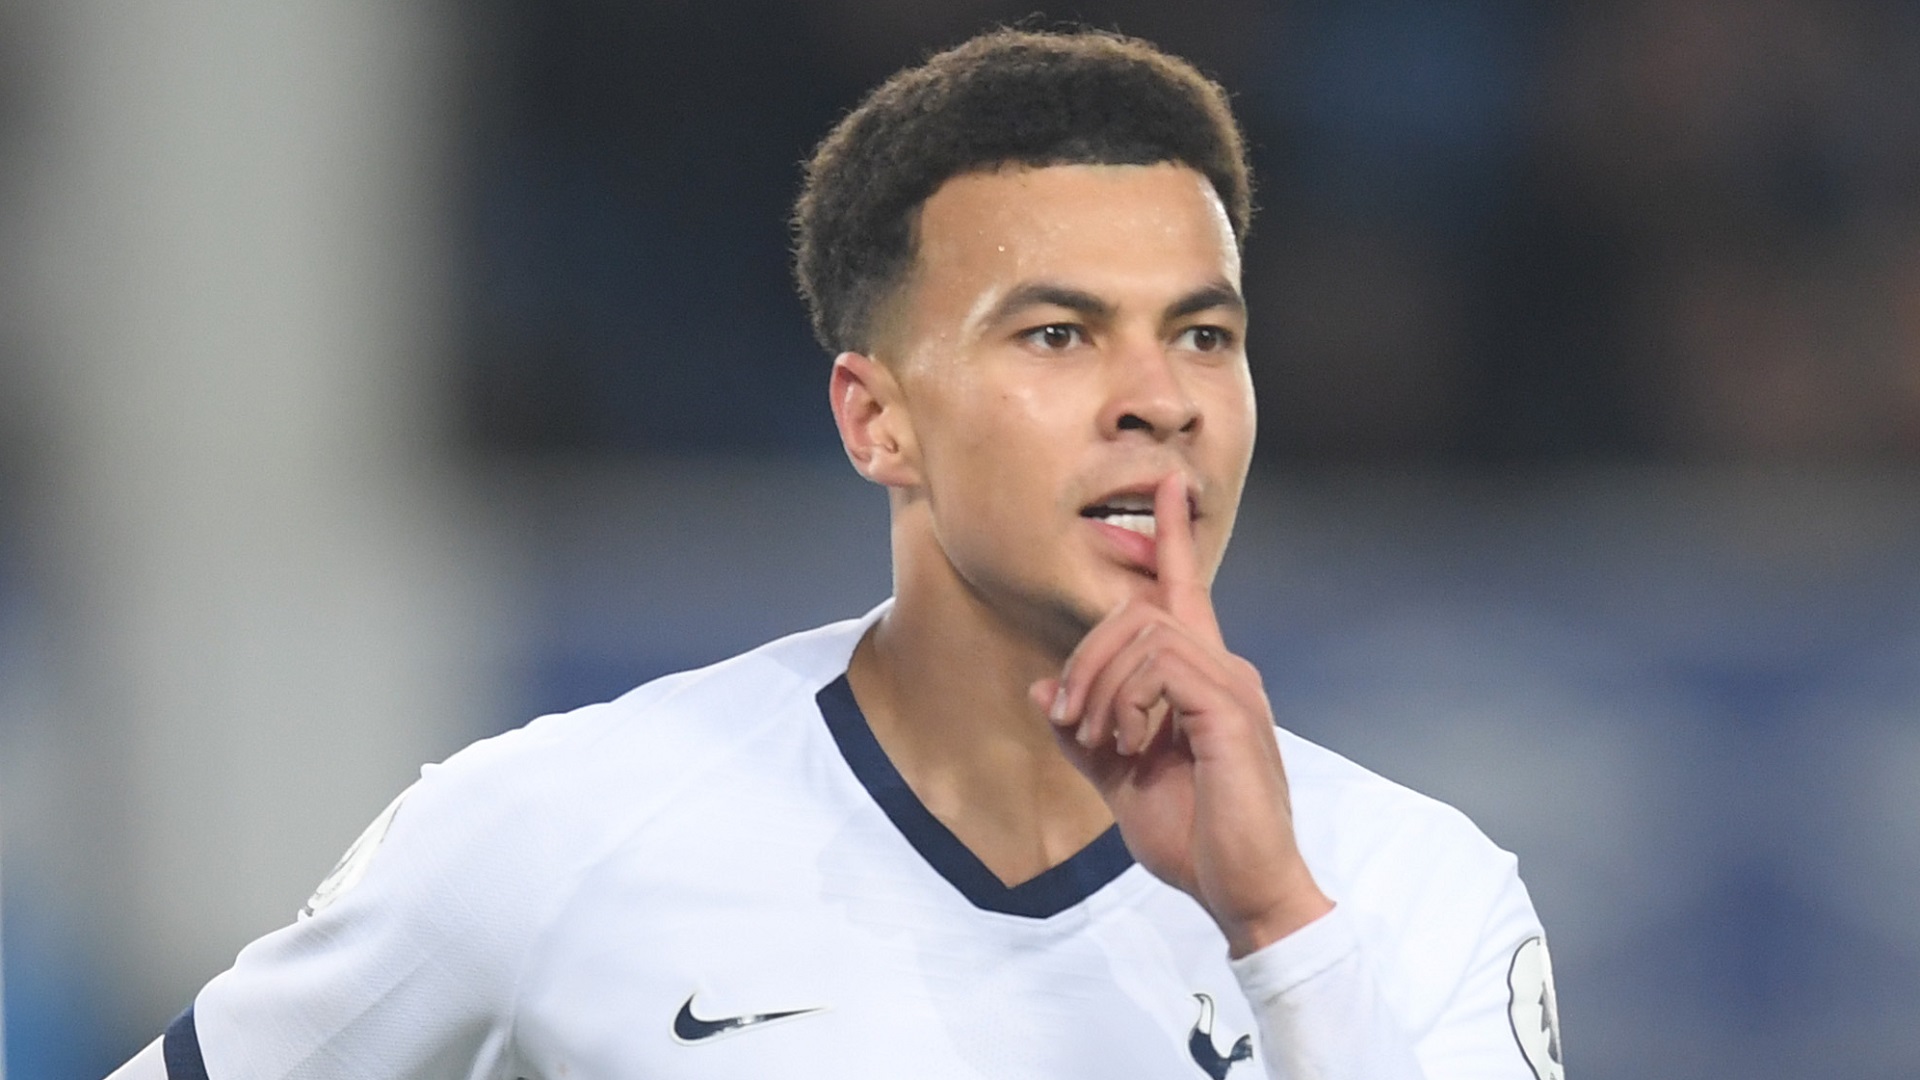 'In one ear and out the other' - Alli says criticism of Tottenham performances doesn't register